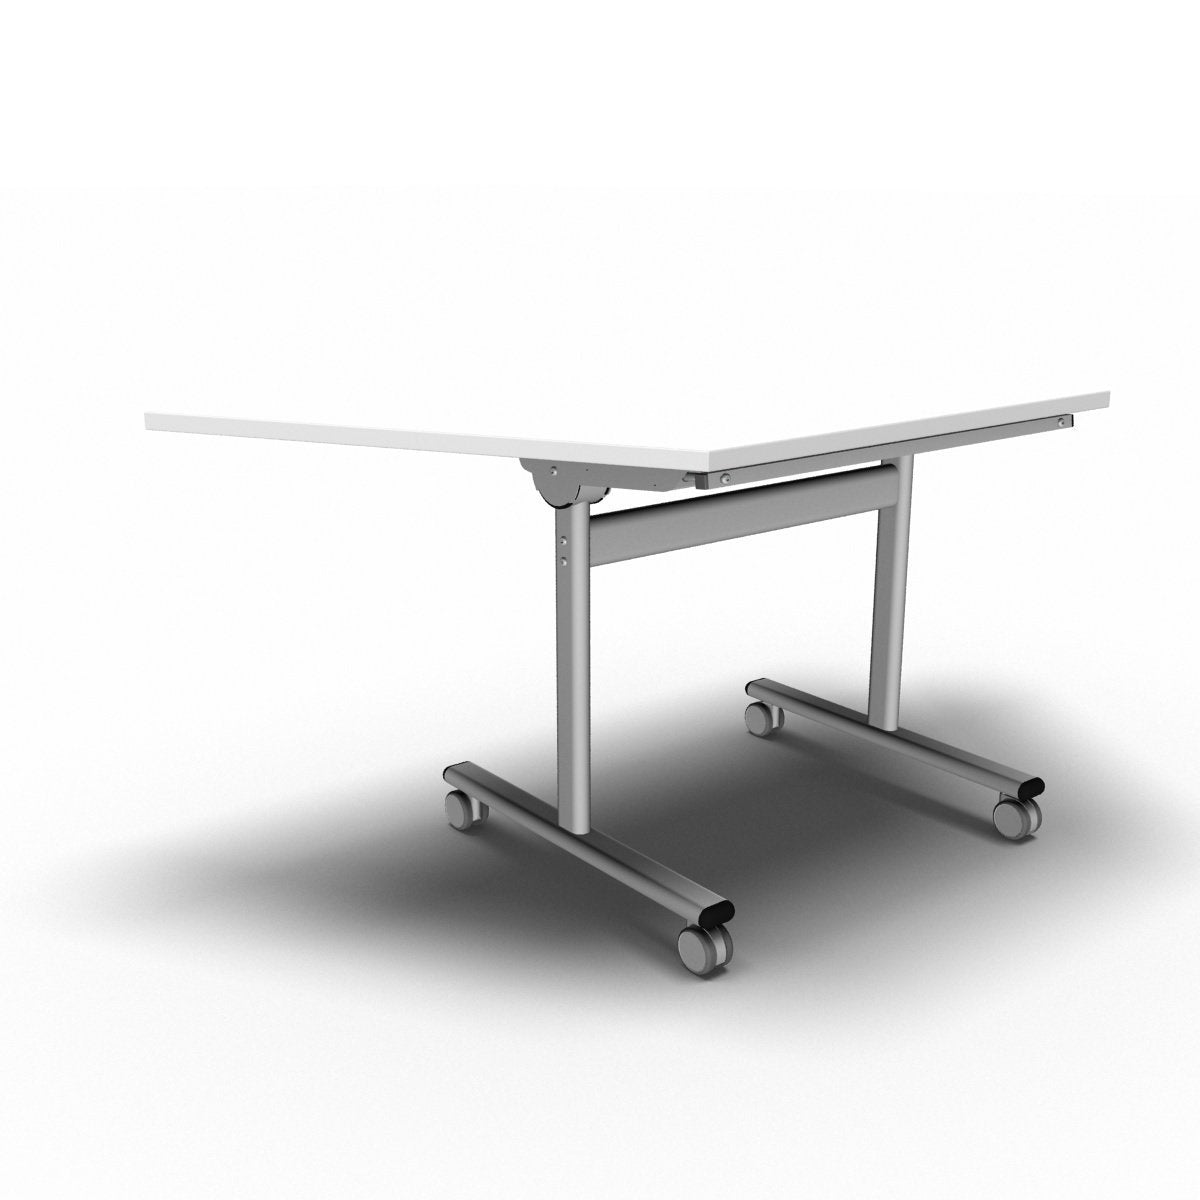 Table 1600 x 800 x 720mm / Trapezoidal / White Synergy Flip Top Tables